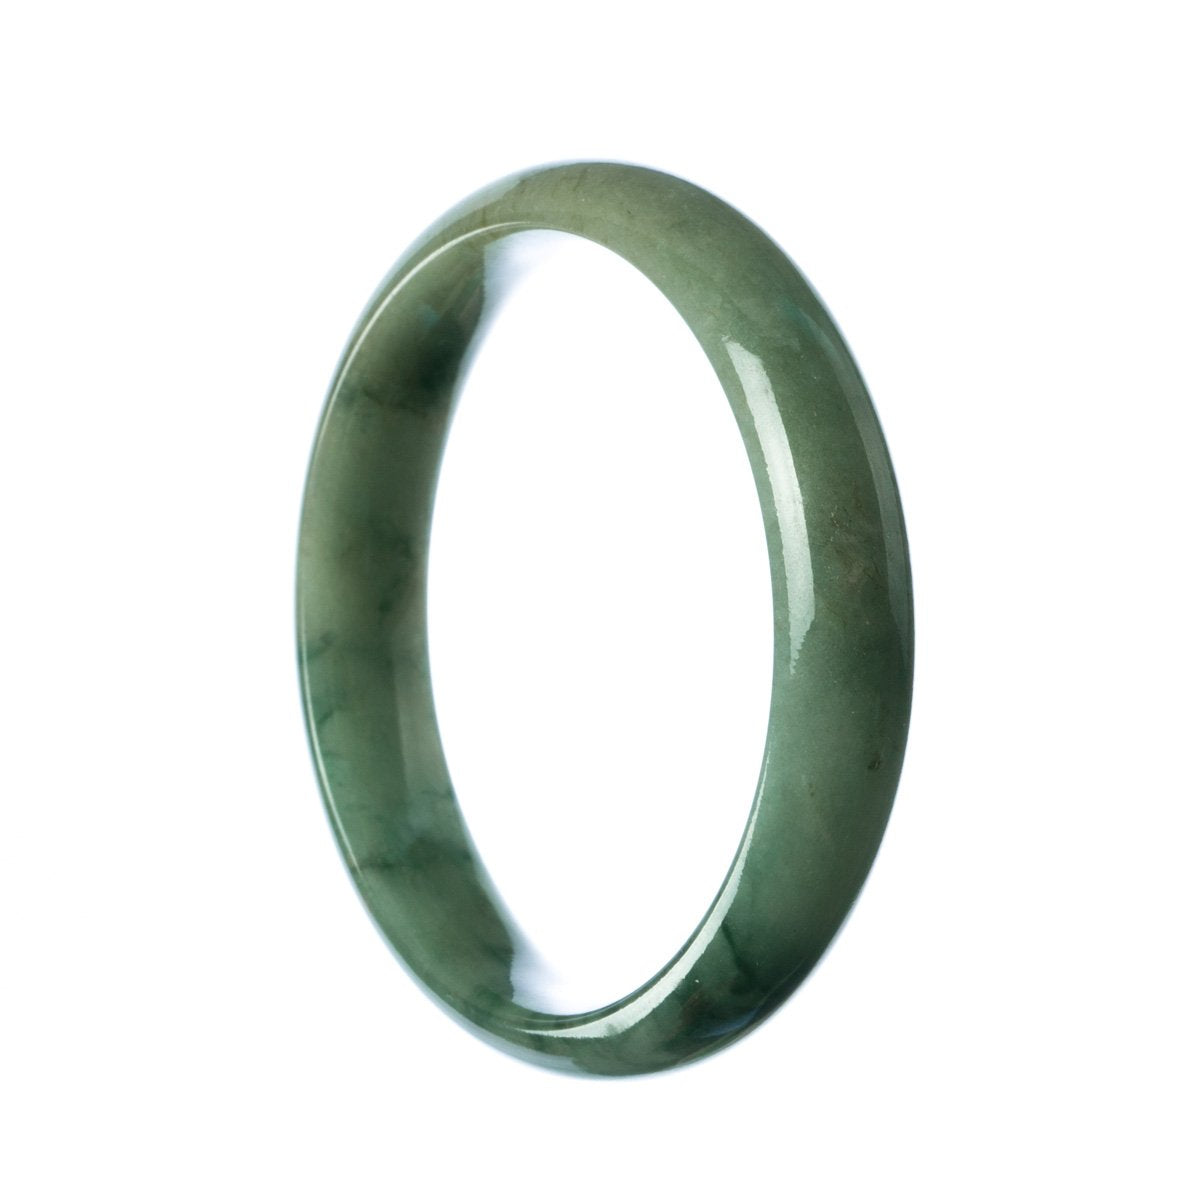 A beautiful half moon-shaped authentic Type A Green Jadeite Jade bangle, measuring 59mm in diameter. Crafted by MAYS™, this bangle is a stunning piece of jewelry.